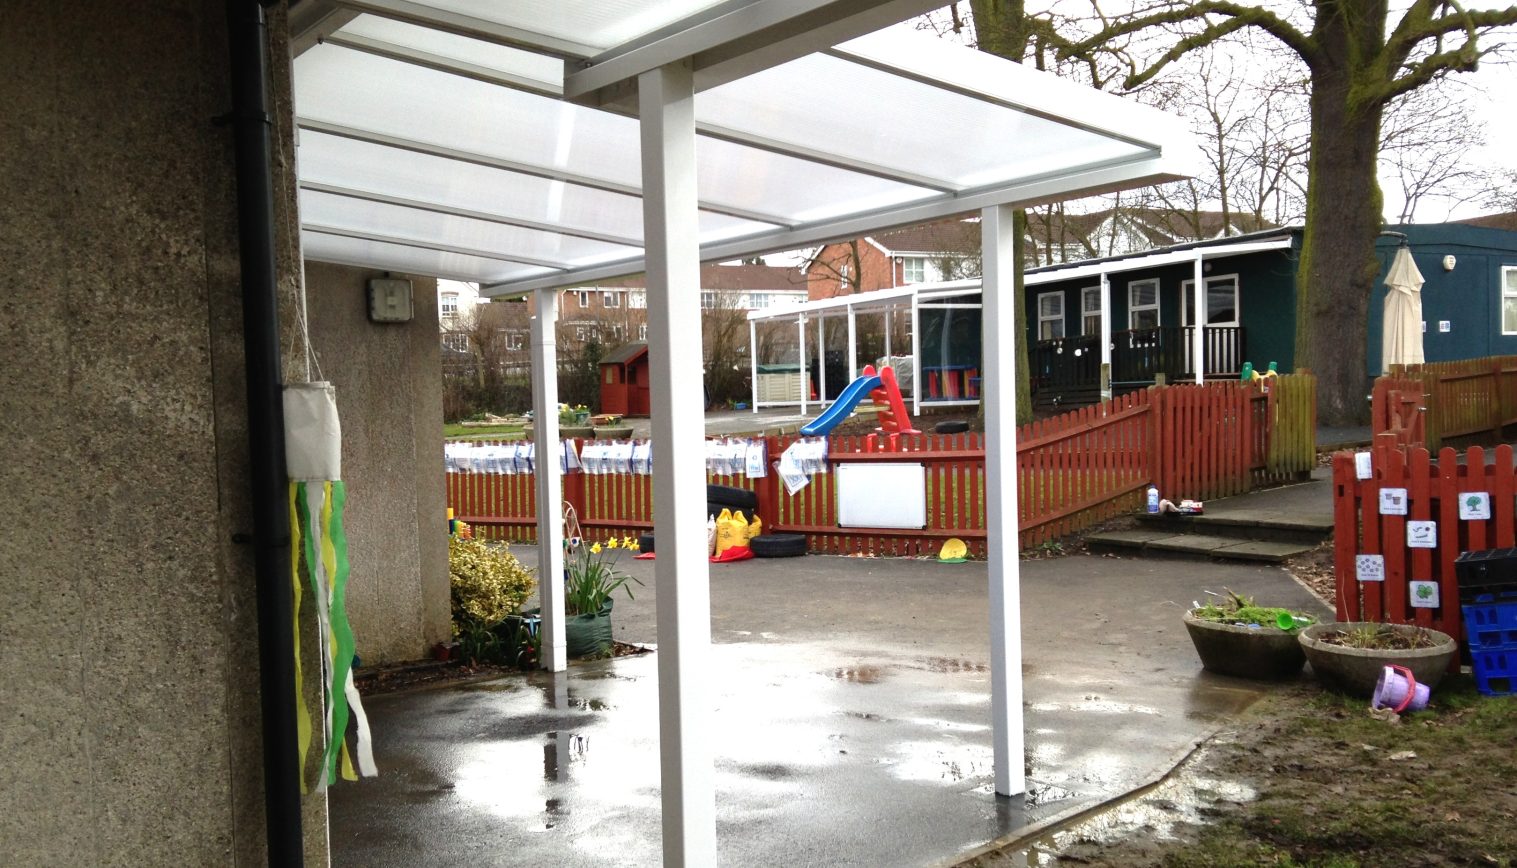 St Meryl Junior & Infant School – Two Wall Mounted Canopies